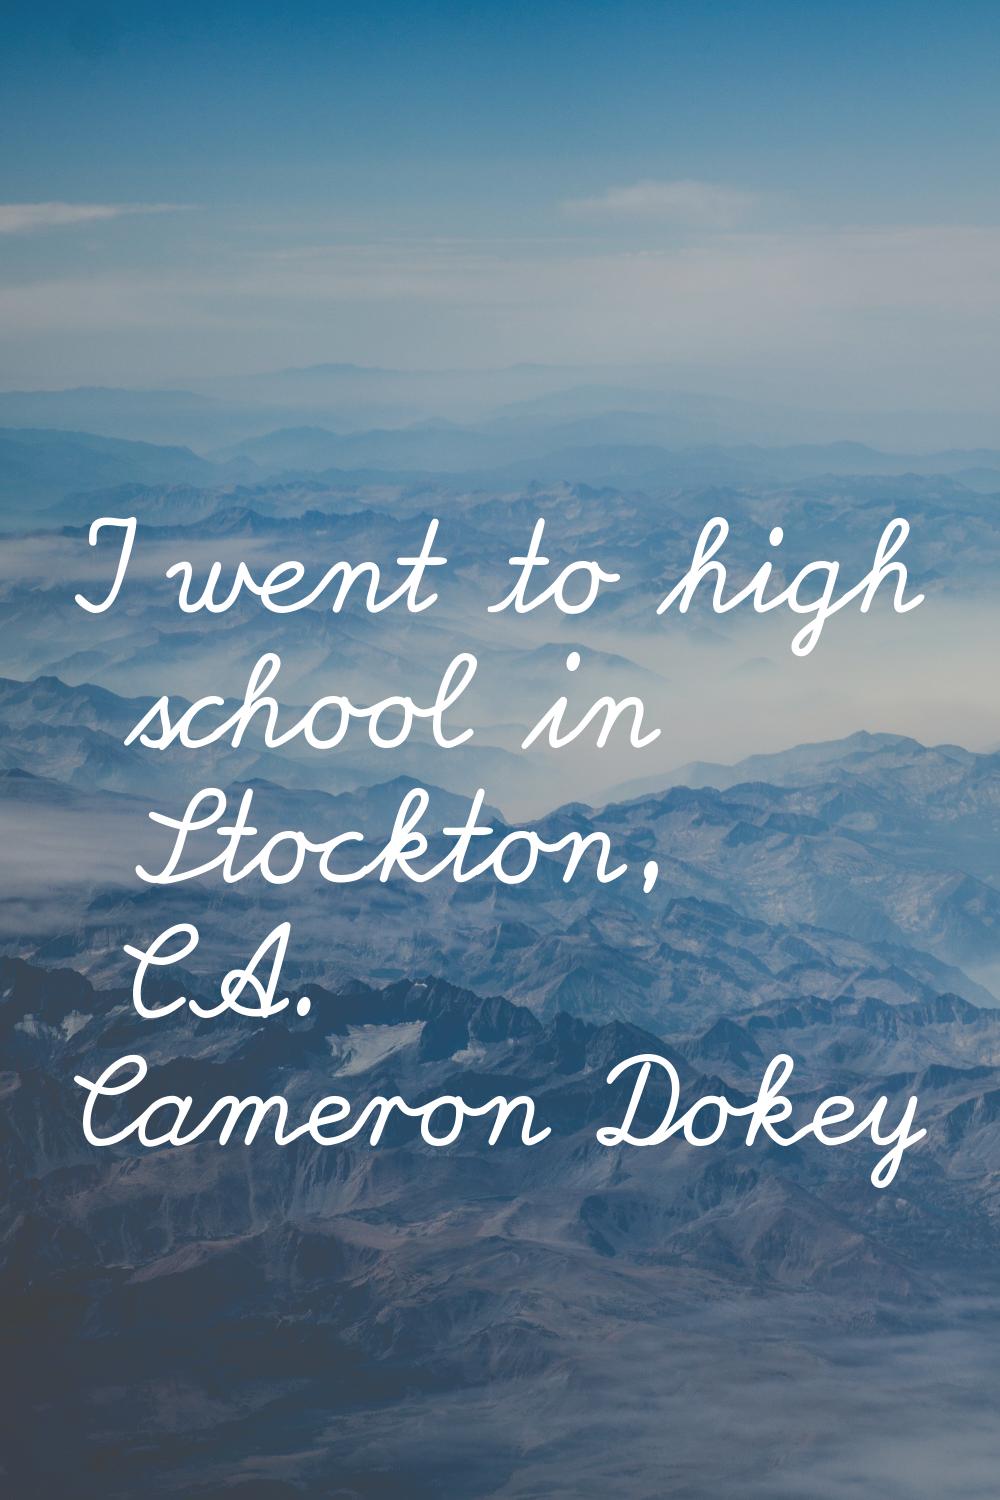 I went to high school in Stockton, CA.